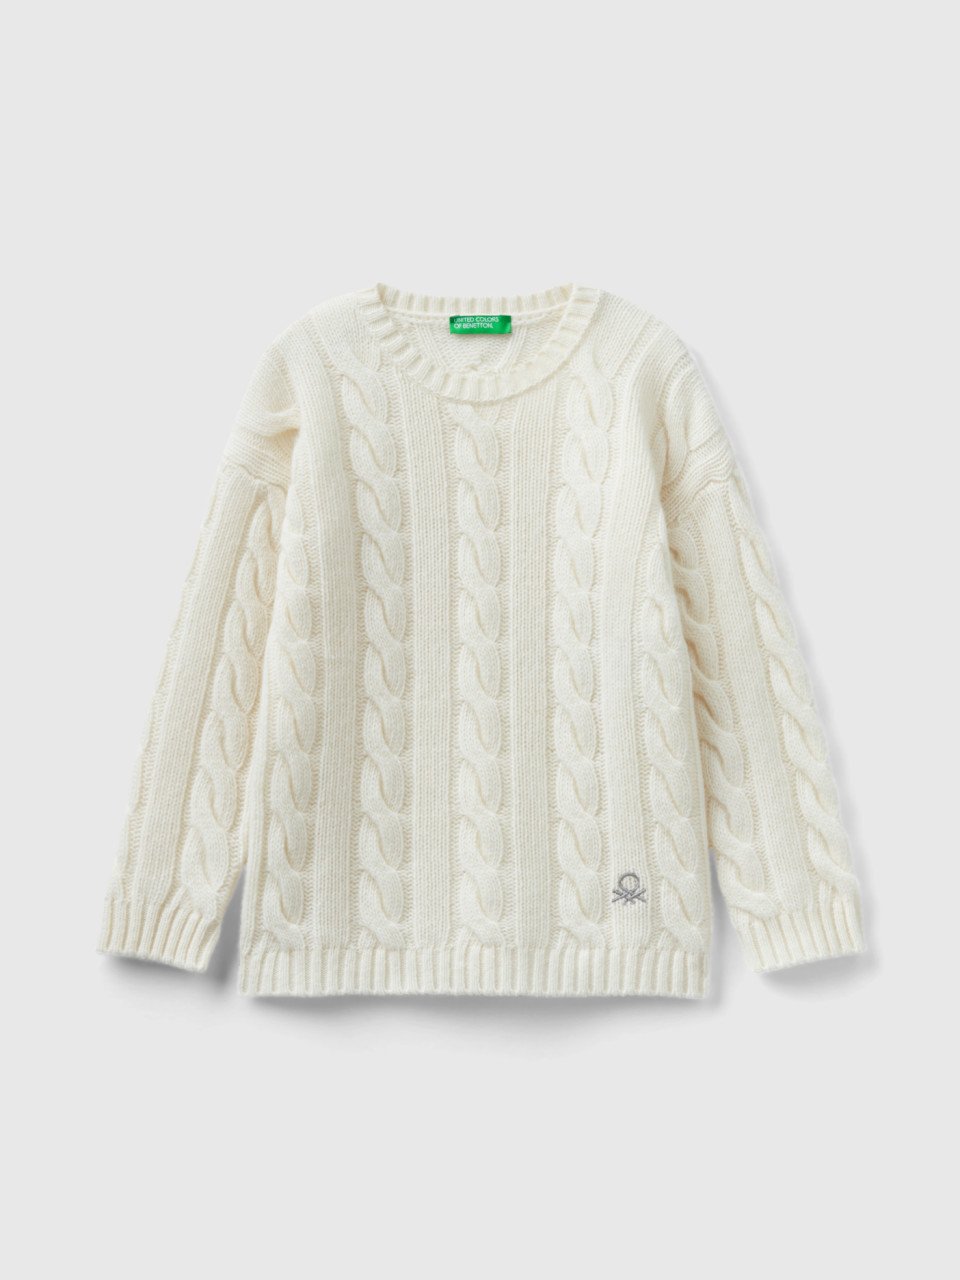 Benetton, Cable Knit Sweater In Wool Blend, White, Kids